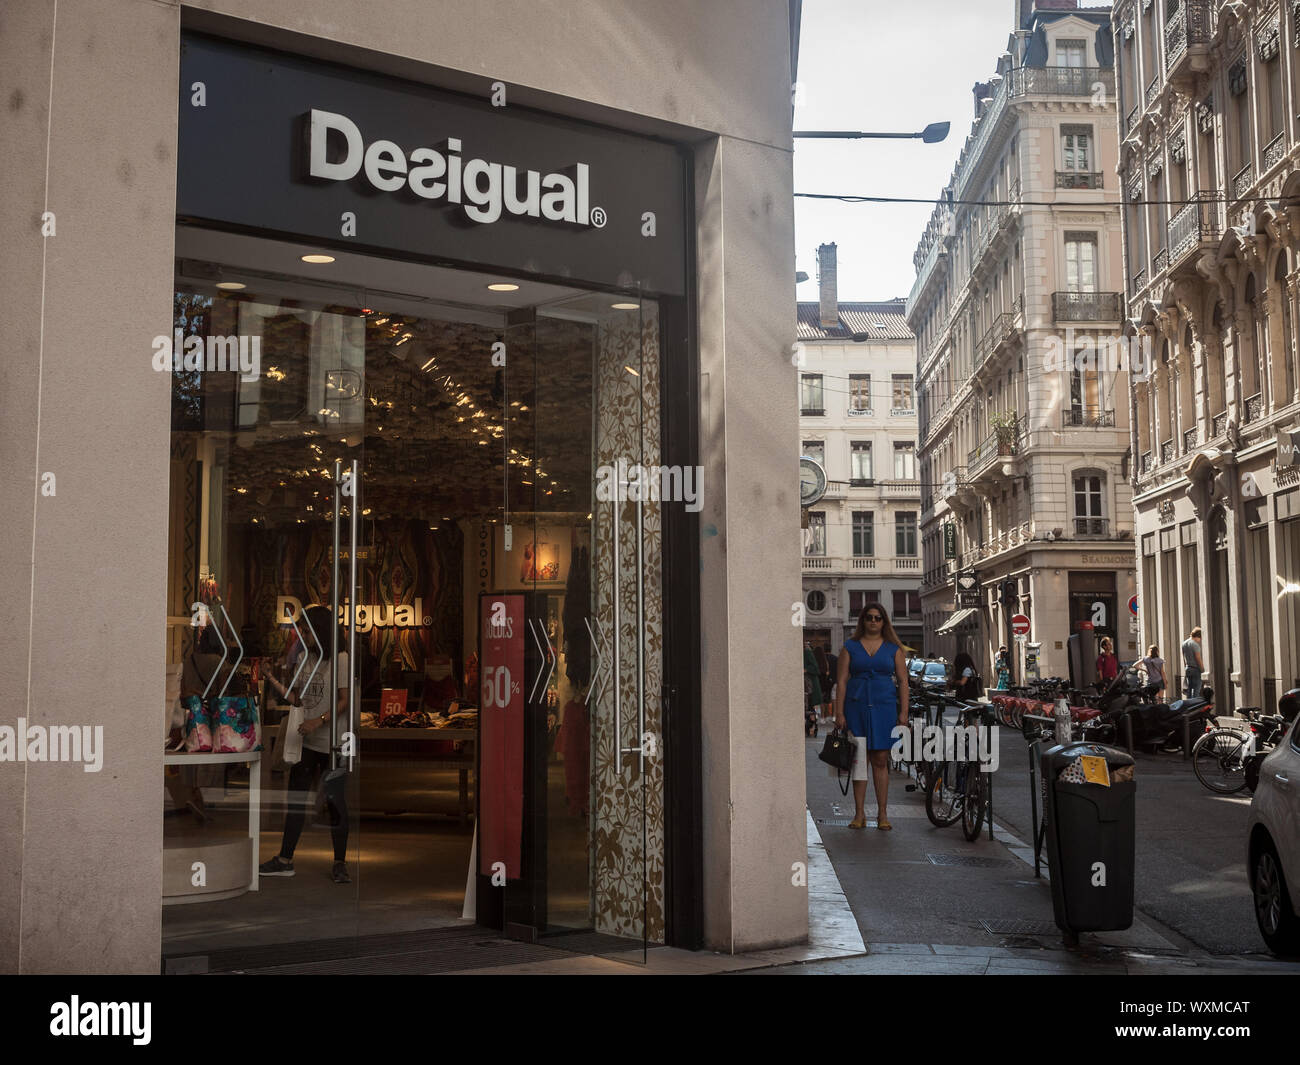 LYON, FRANCE - JULY 13, 2019: Desigual logo in front of their main boutique for Lyon. Desigual is a Spanish fashion designer and retailer specialized Stock Photo